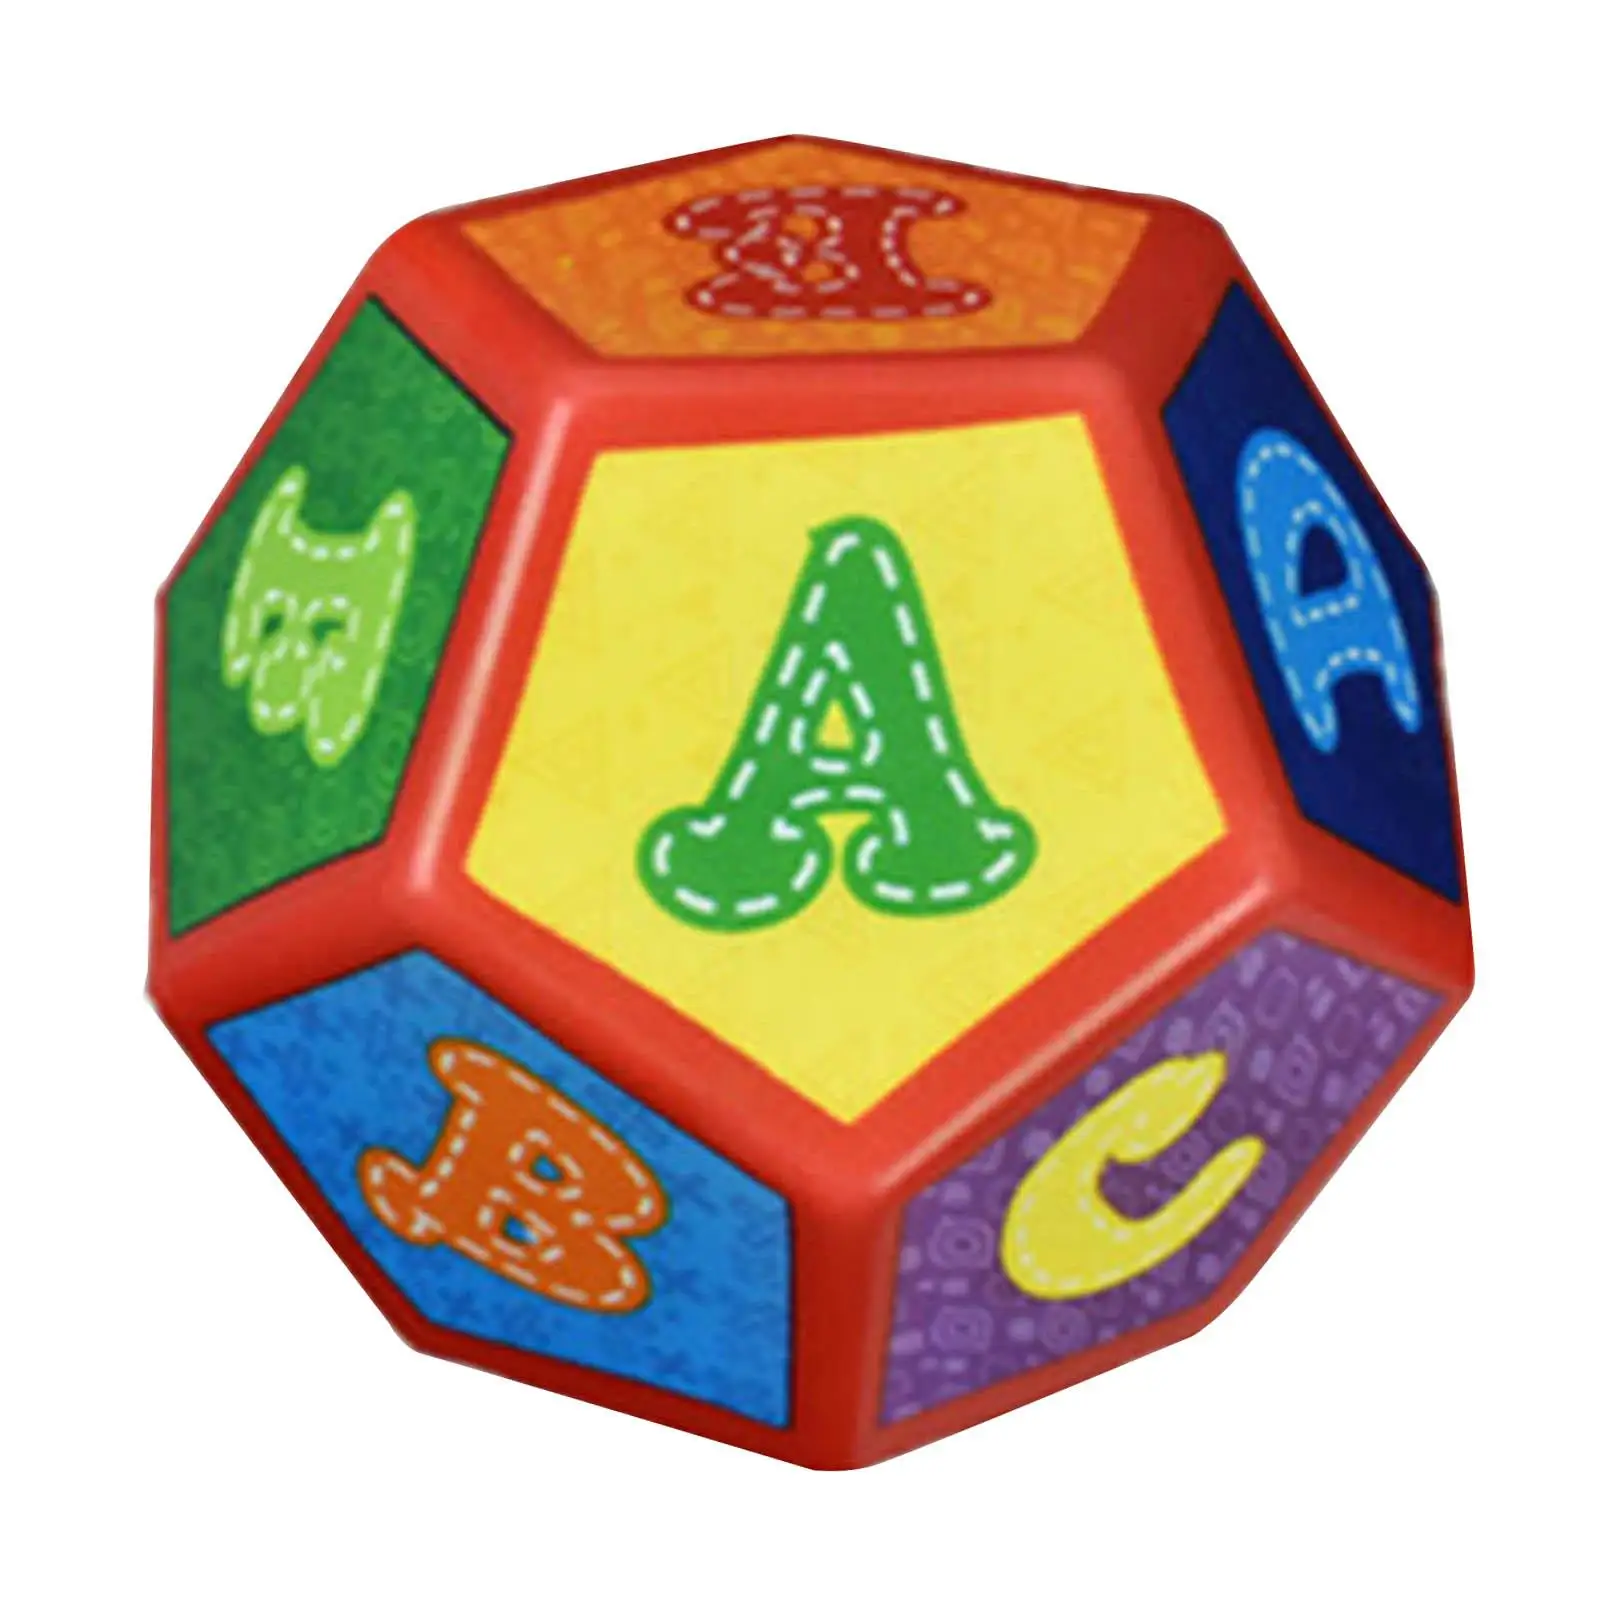  Sided Dice Lightweight Play Entertainment Toys for Game Accessories